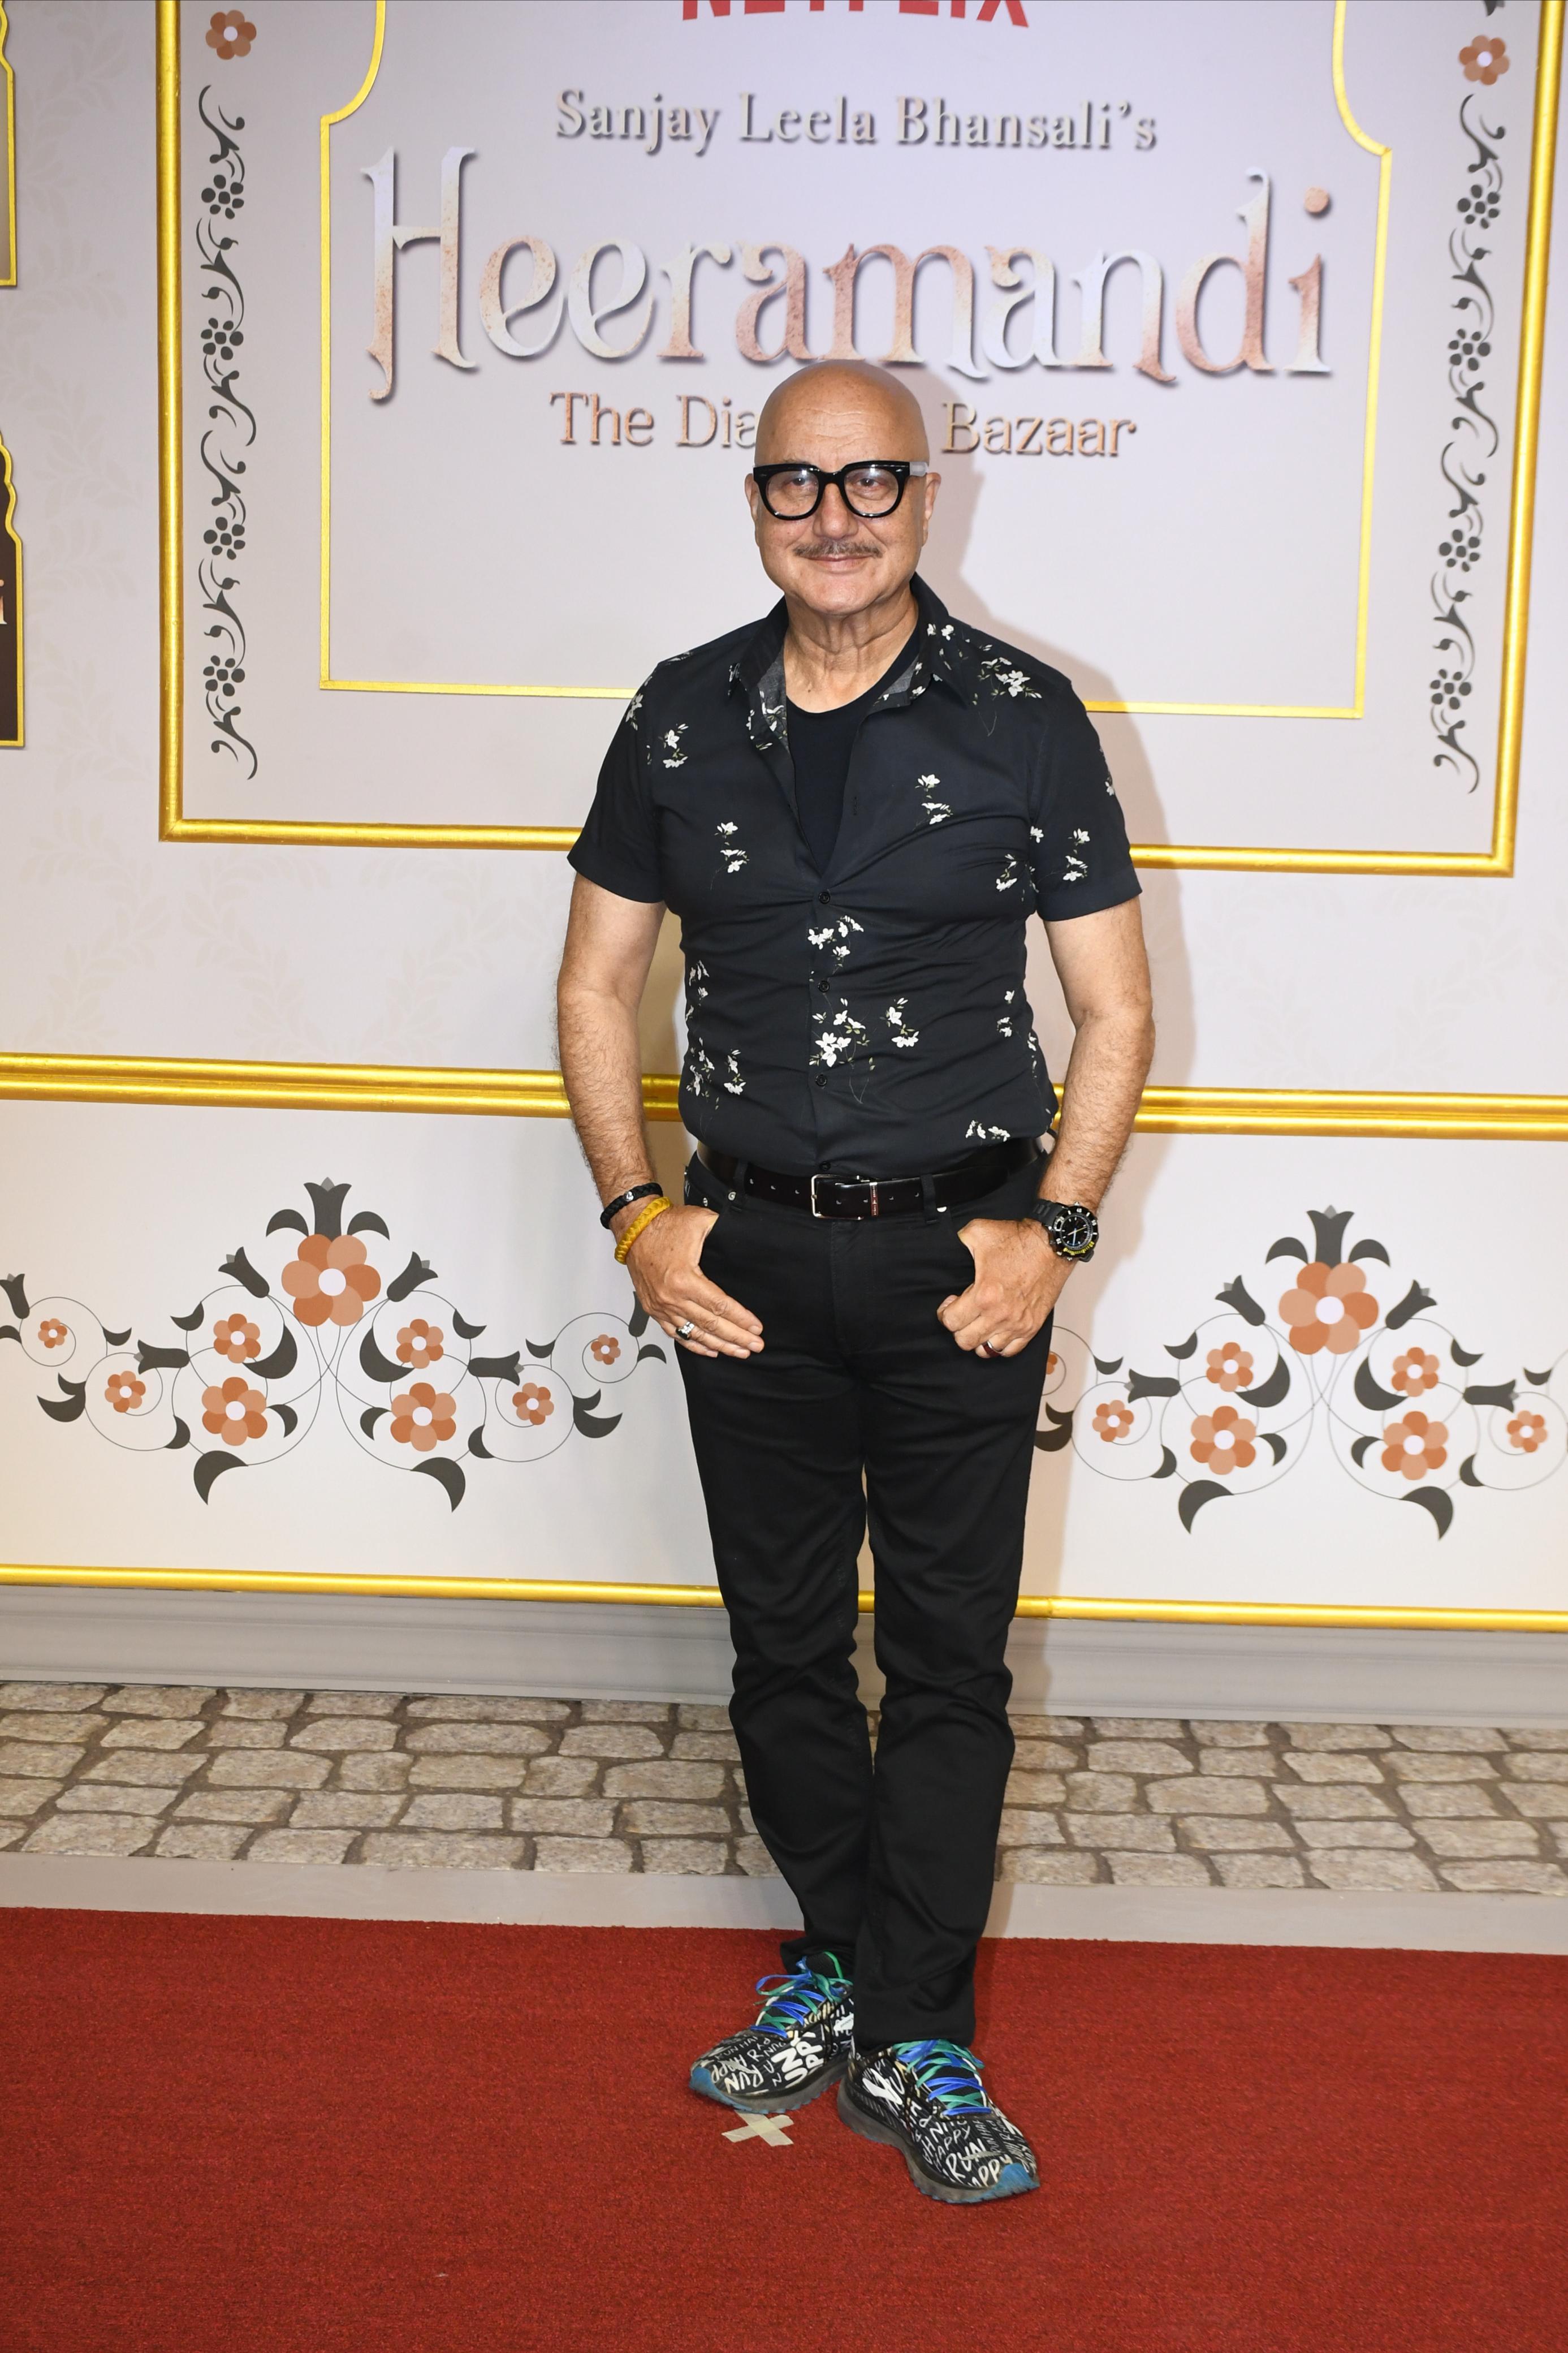 Anupam Kher flashed his smile for the paparazzi at the Heeramandi premiere